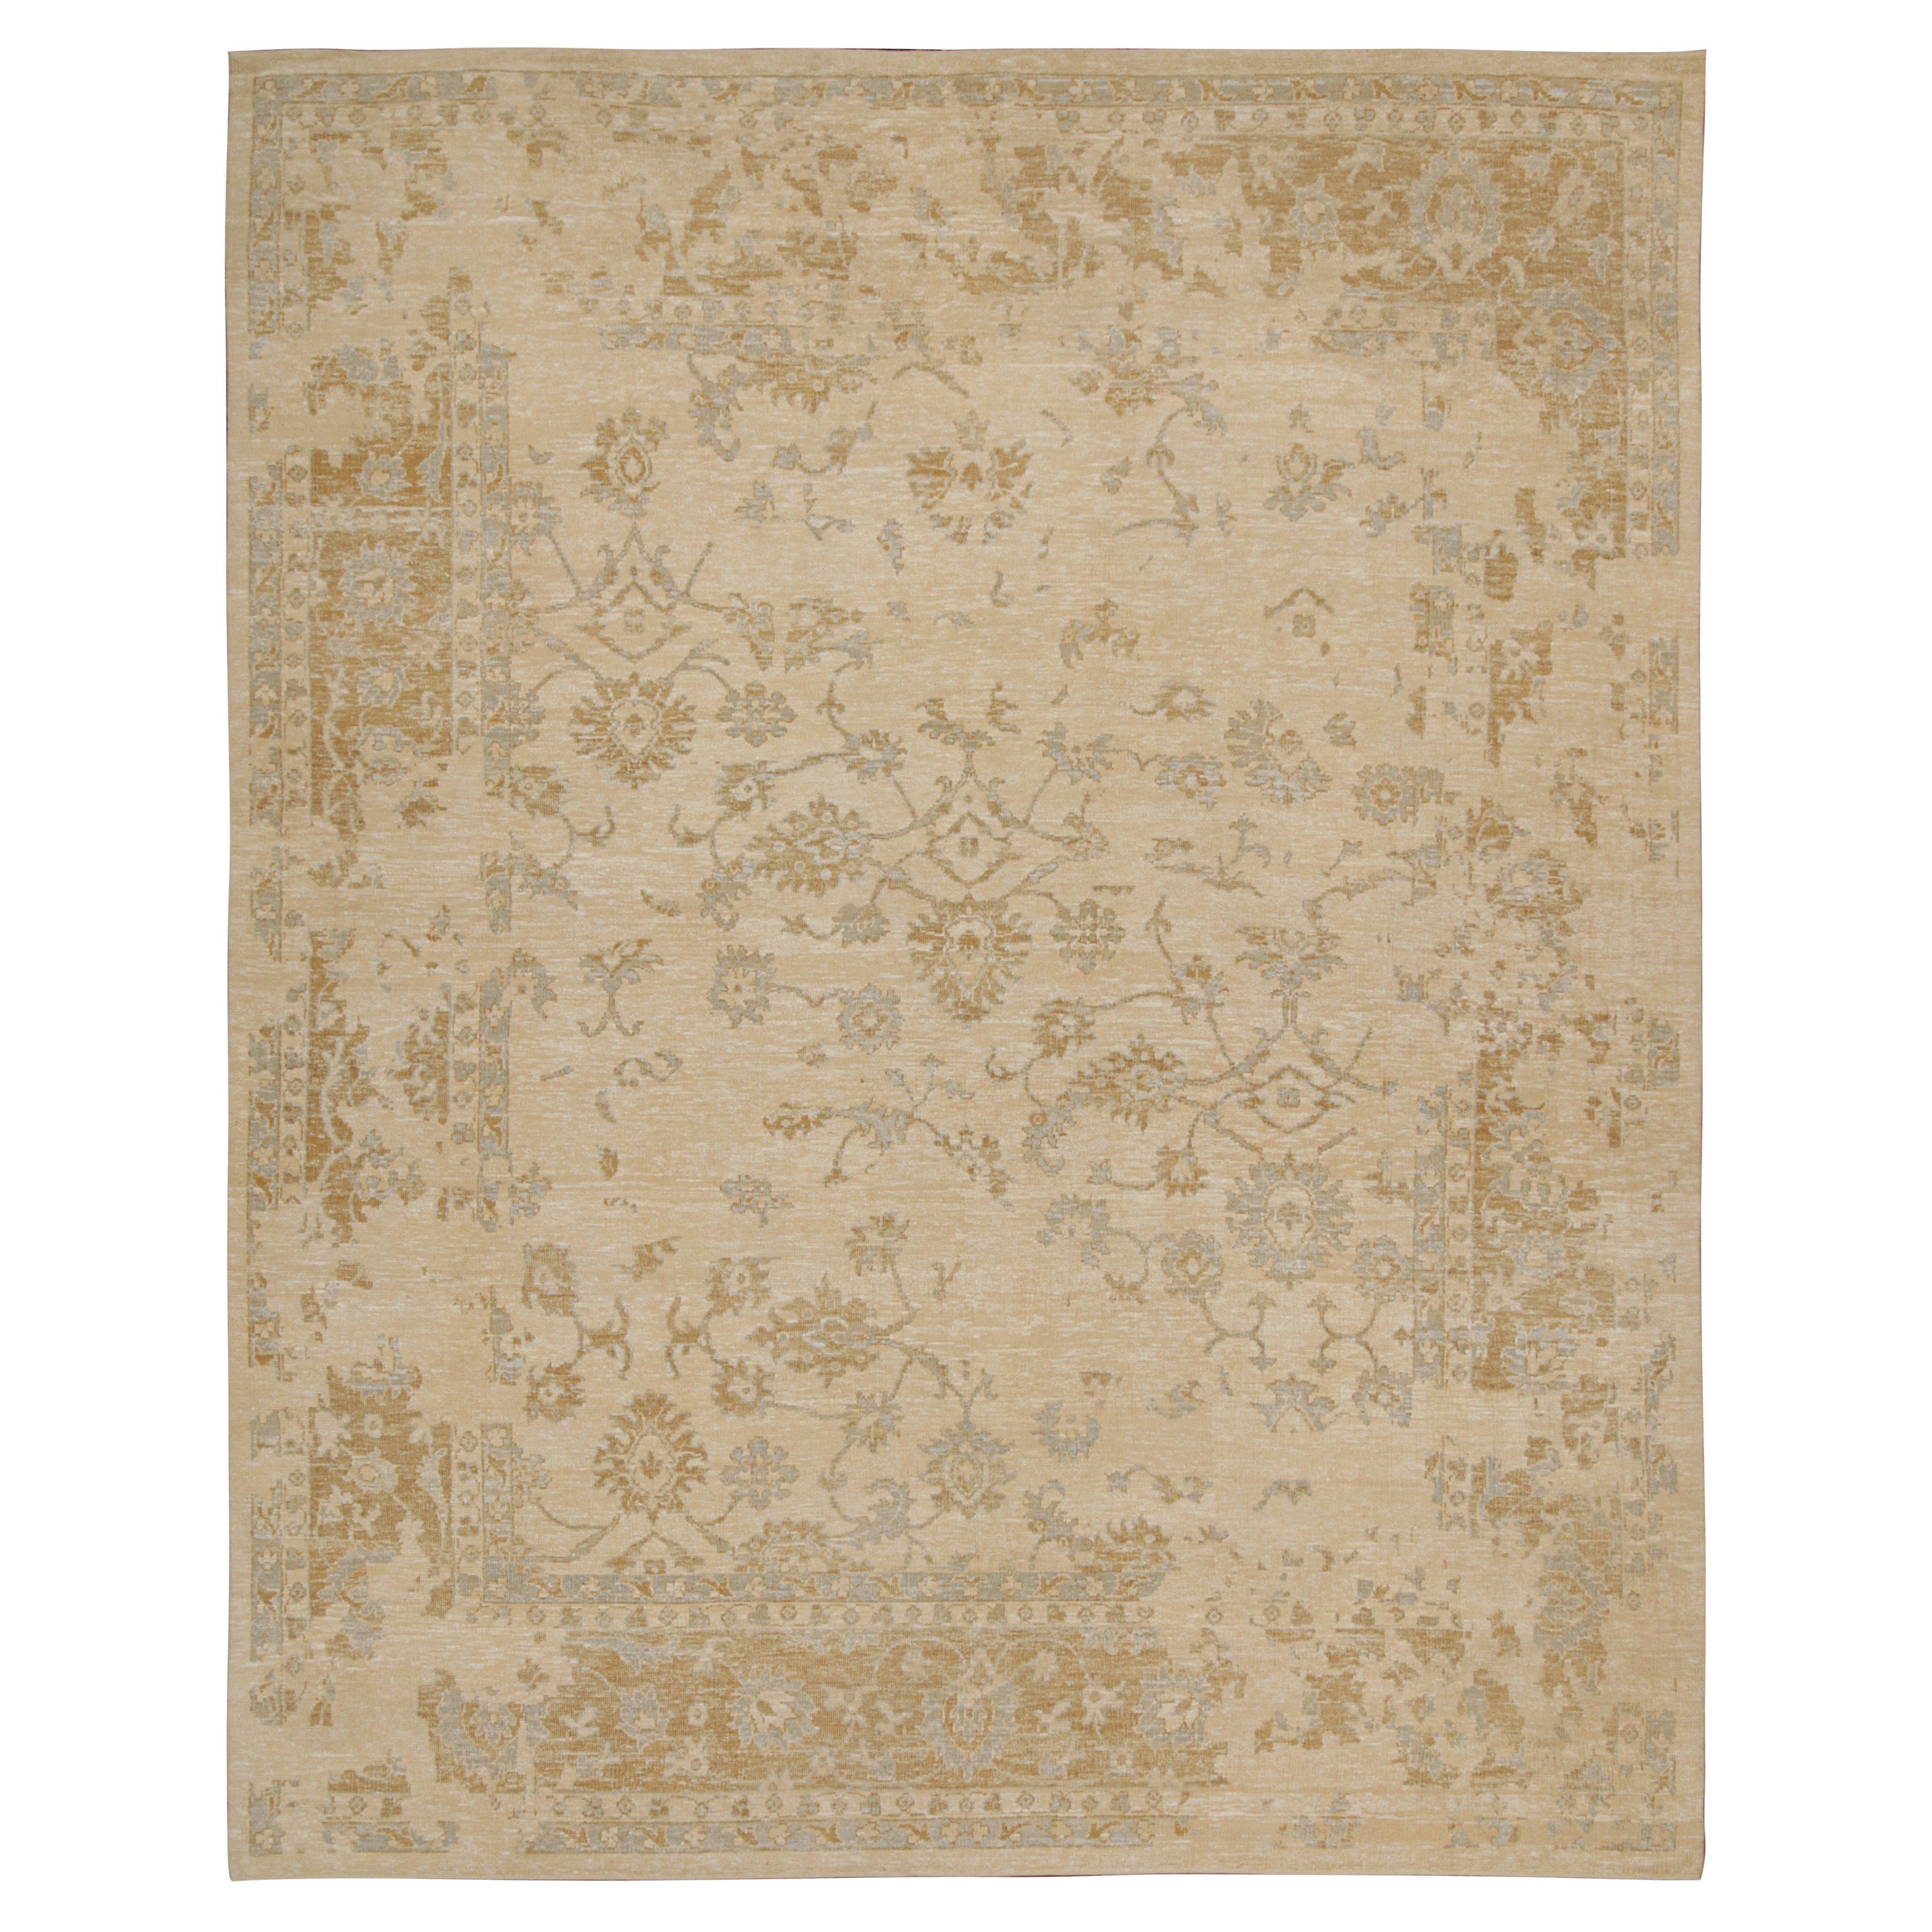 Rug & Kilim’s Oushak Style Rug in Cream with Gold and Blue Floral Patterns For Sale